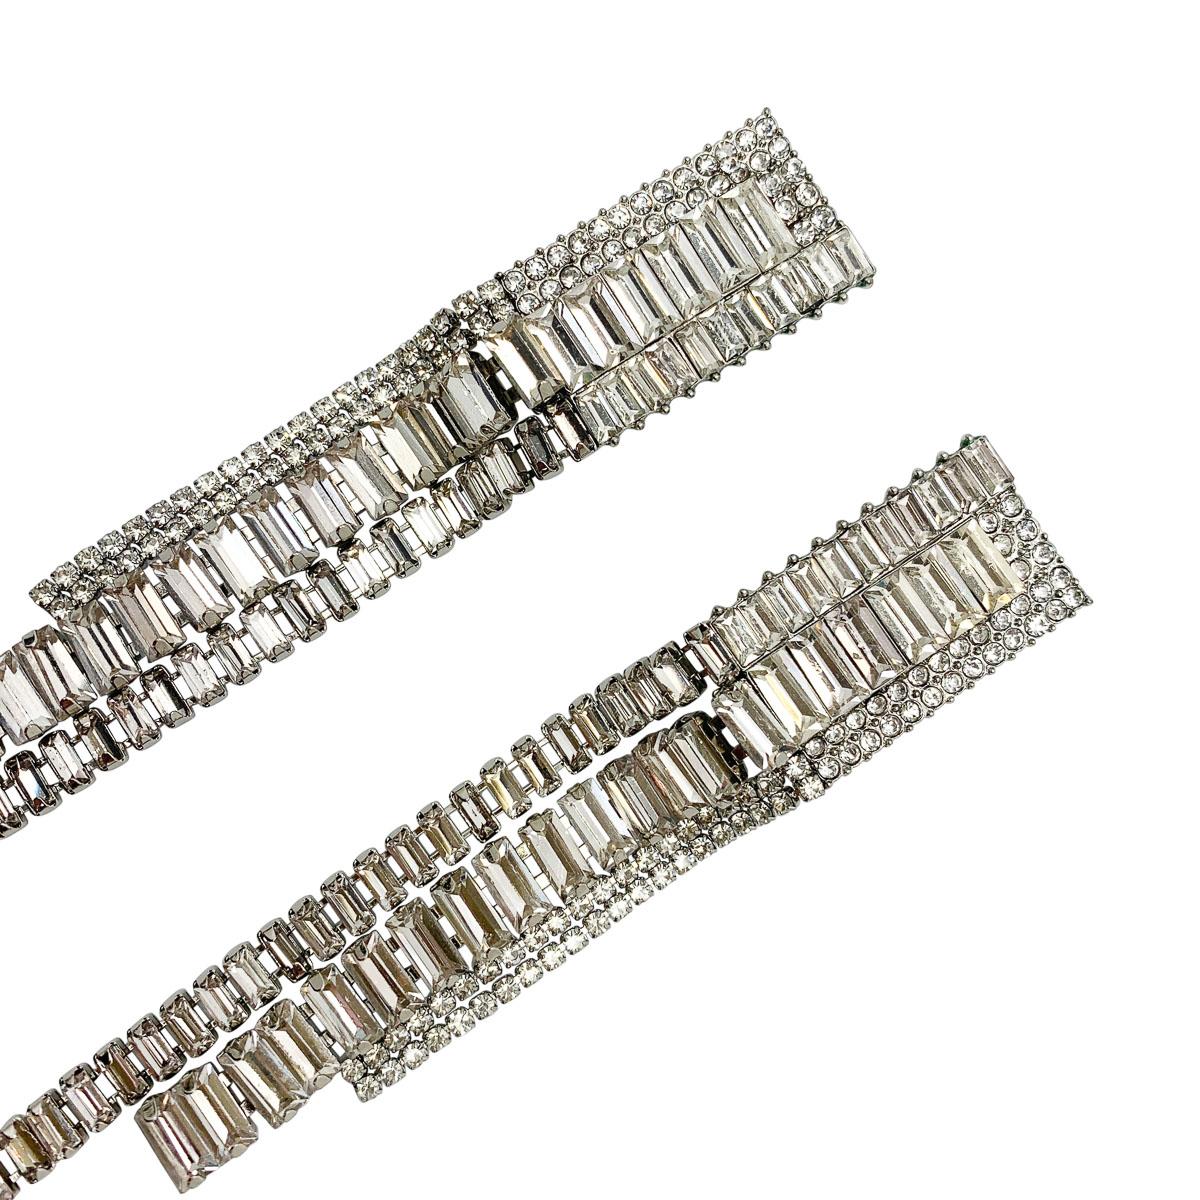 Vintage deco drop earrings. Such an inspired design, comprising art deco influence and laden with luxurious baguette crystals.

Vintage Condition: Very good without damage or noteworthy wear.
Materials: metal, glass crystal
Fastening: clip